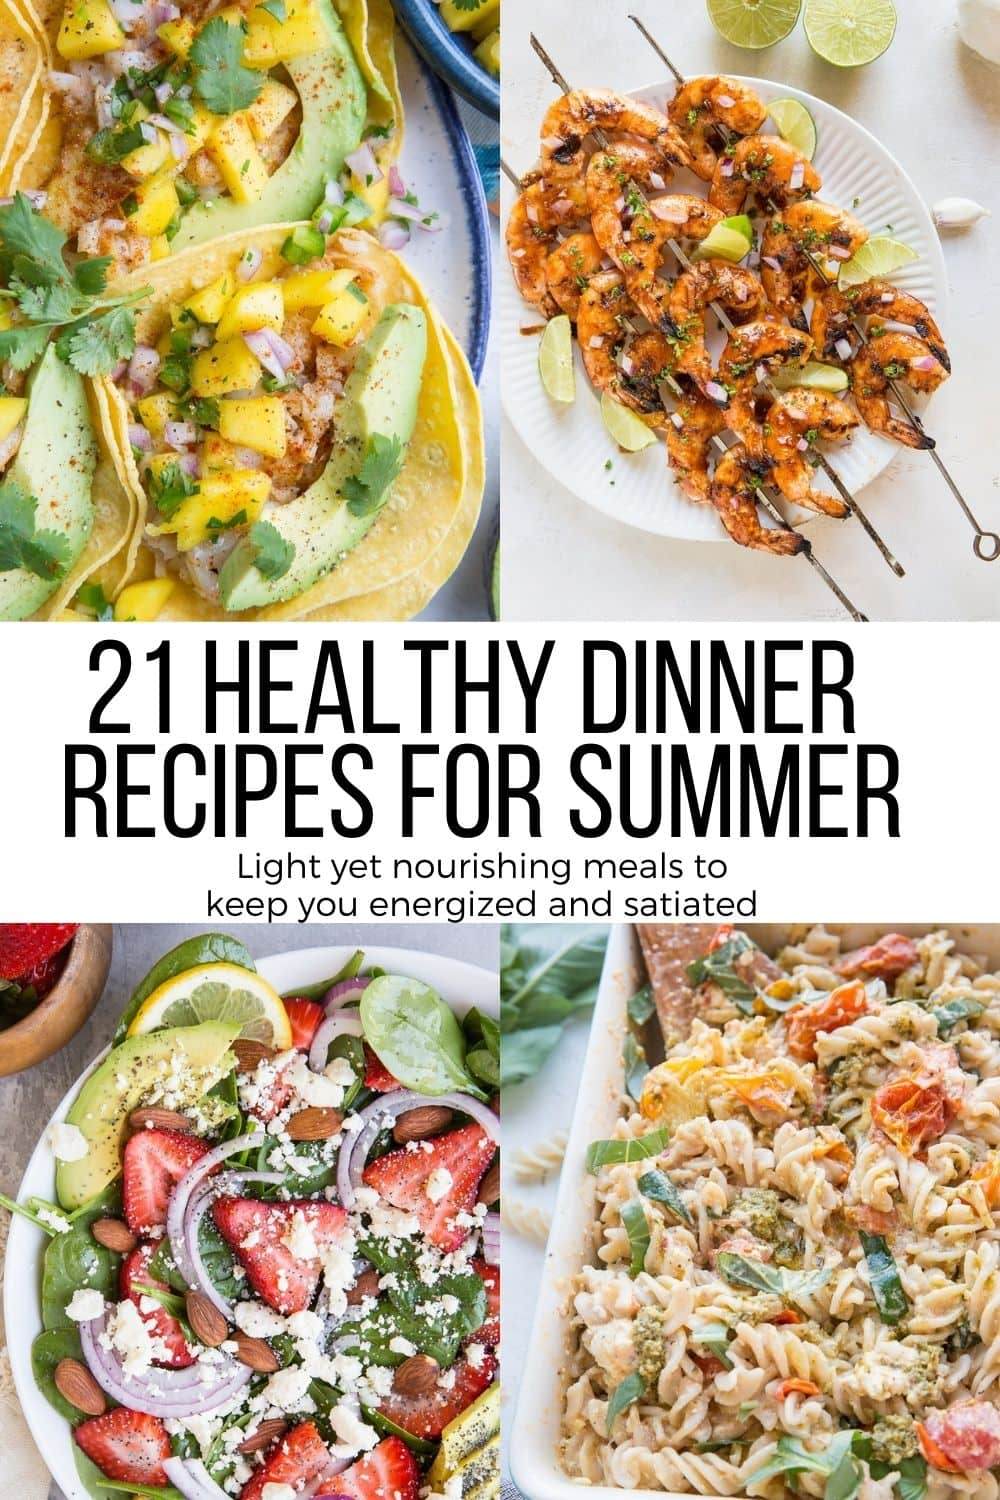 Healthy Summer Dinner - The Roasted